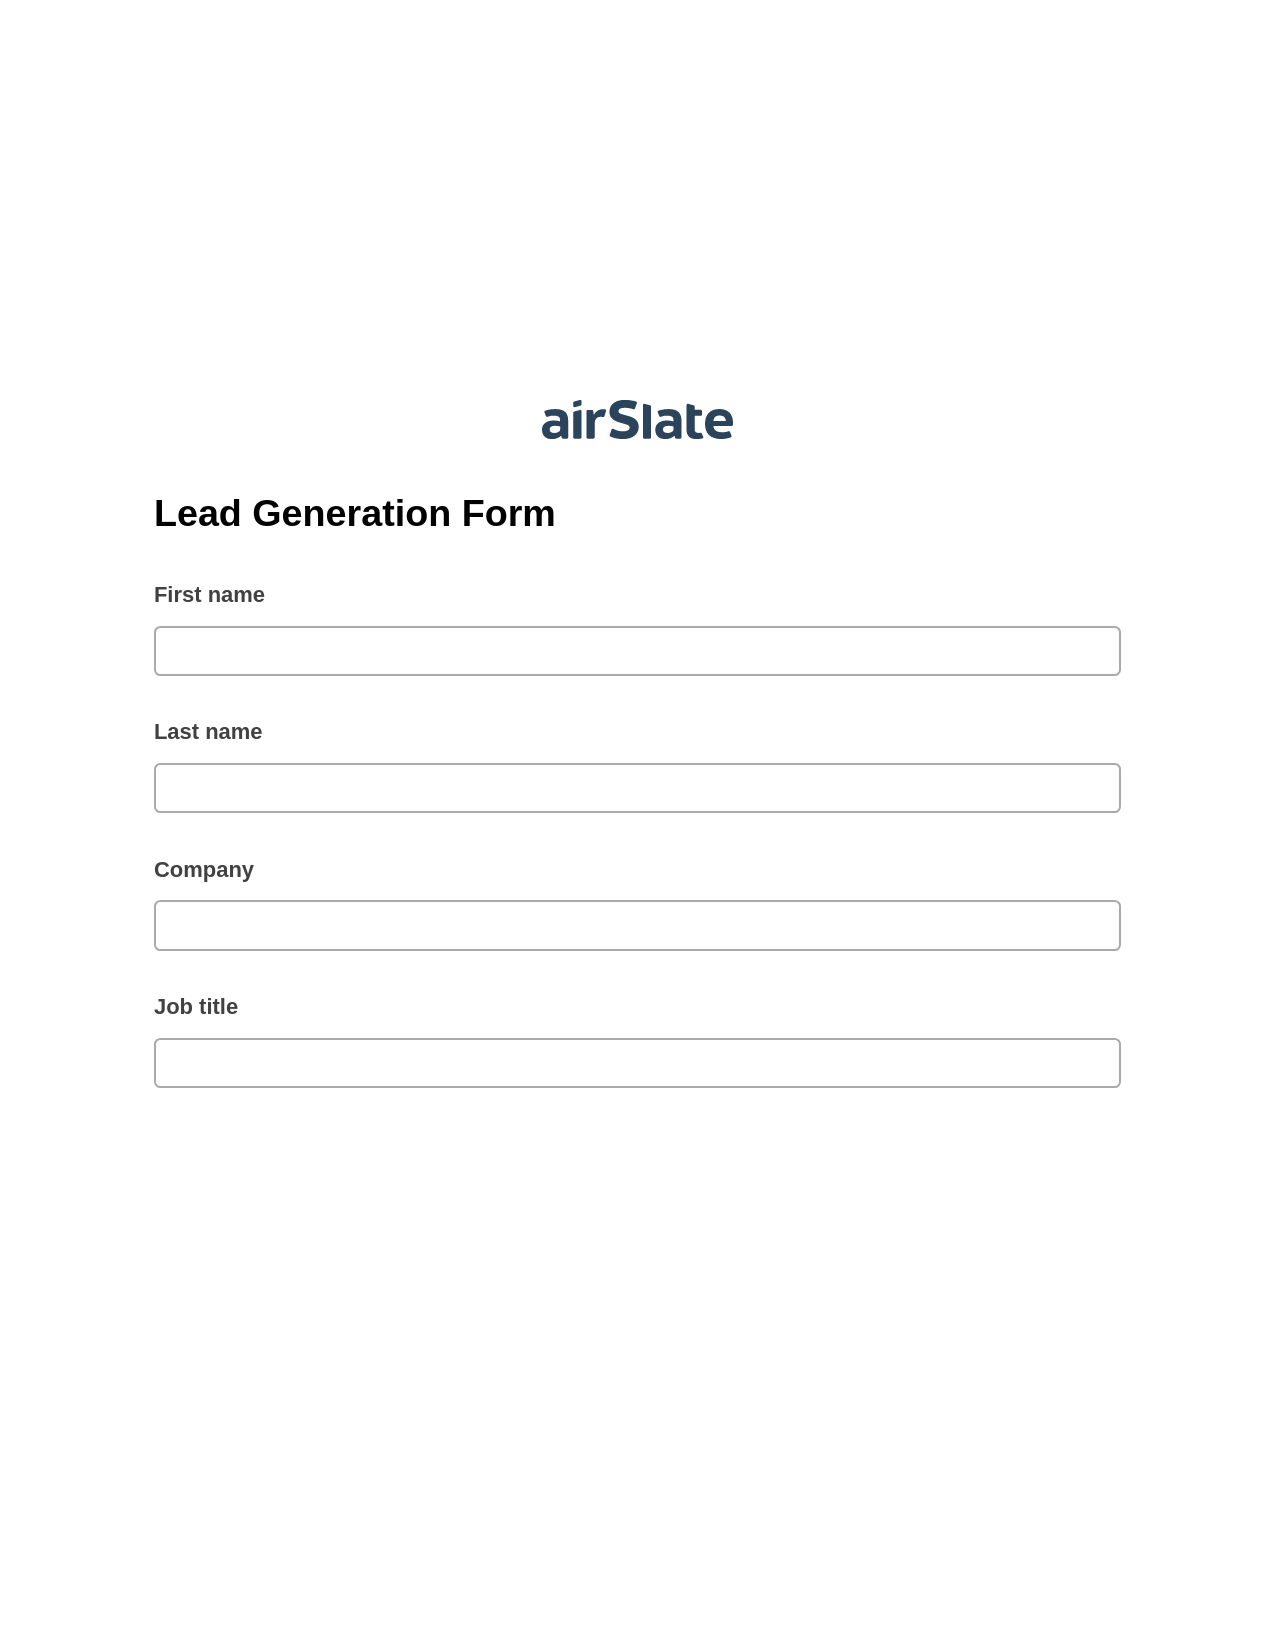 Lead Generation Form Pre-fill from Salesforce Records Bot, Remove Tags From Slate Bot, Export to Smartsheet